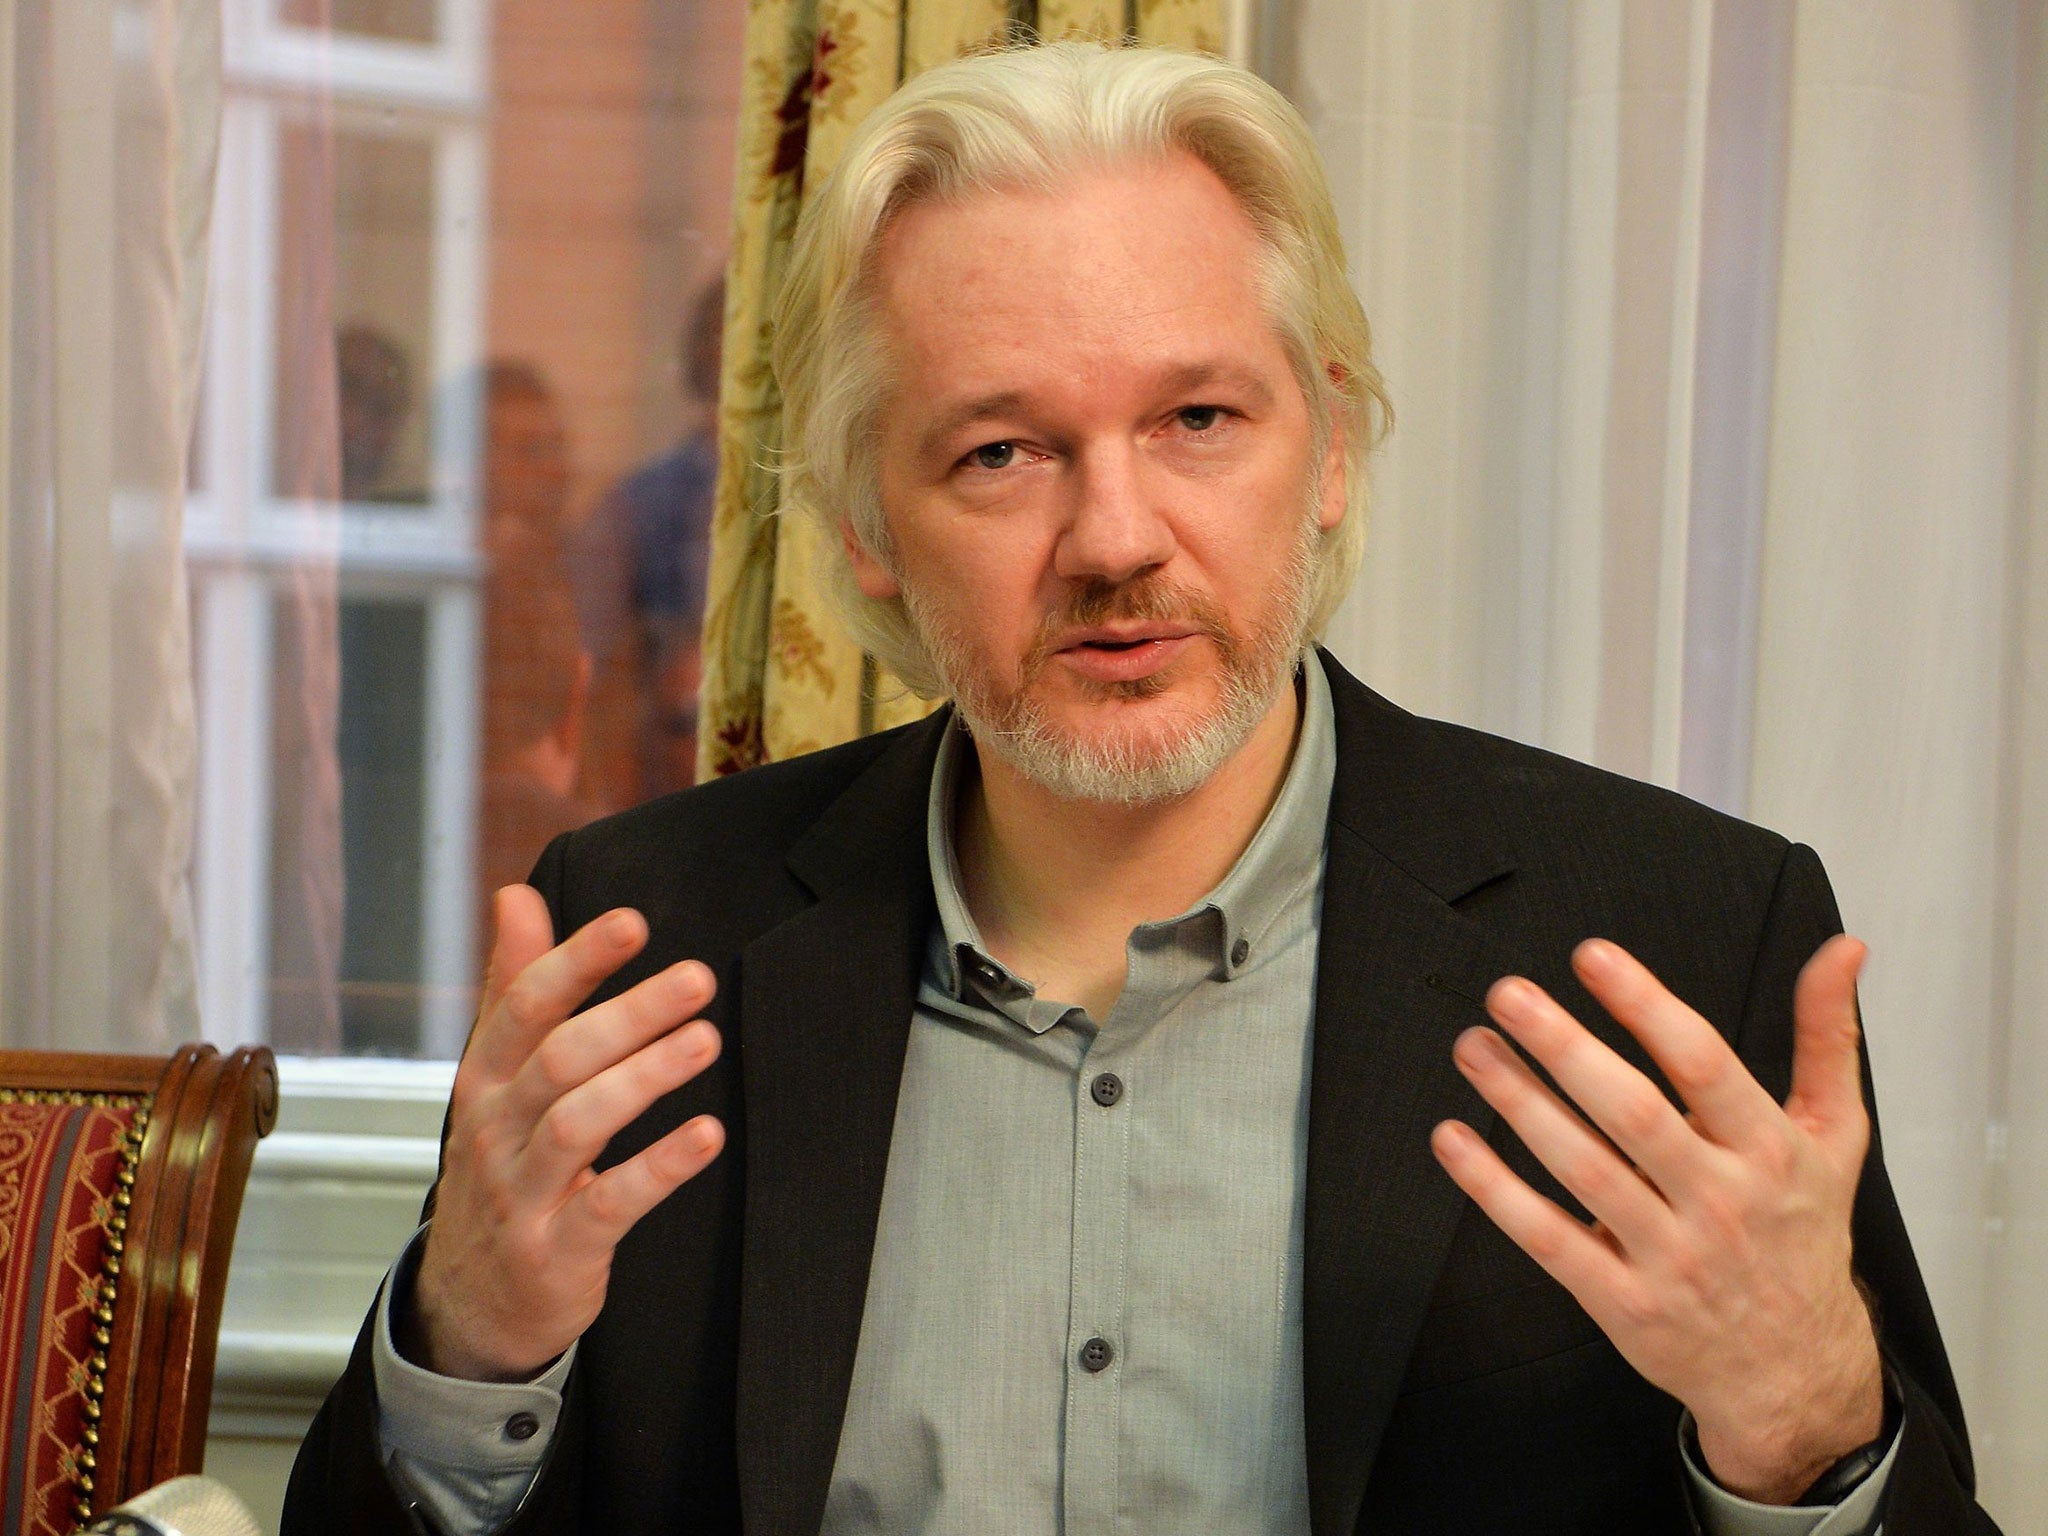 WikiLeaks founder Julian Assange said the leaks includes hundreds of thousands of emails and documents